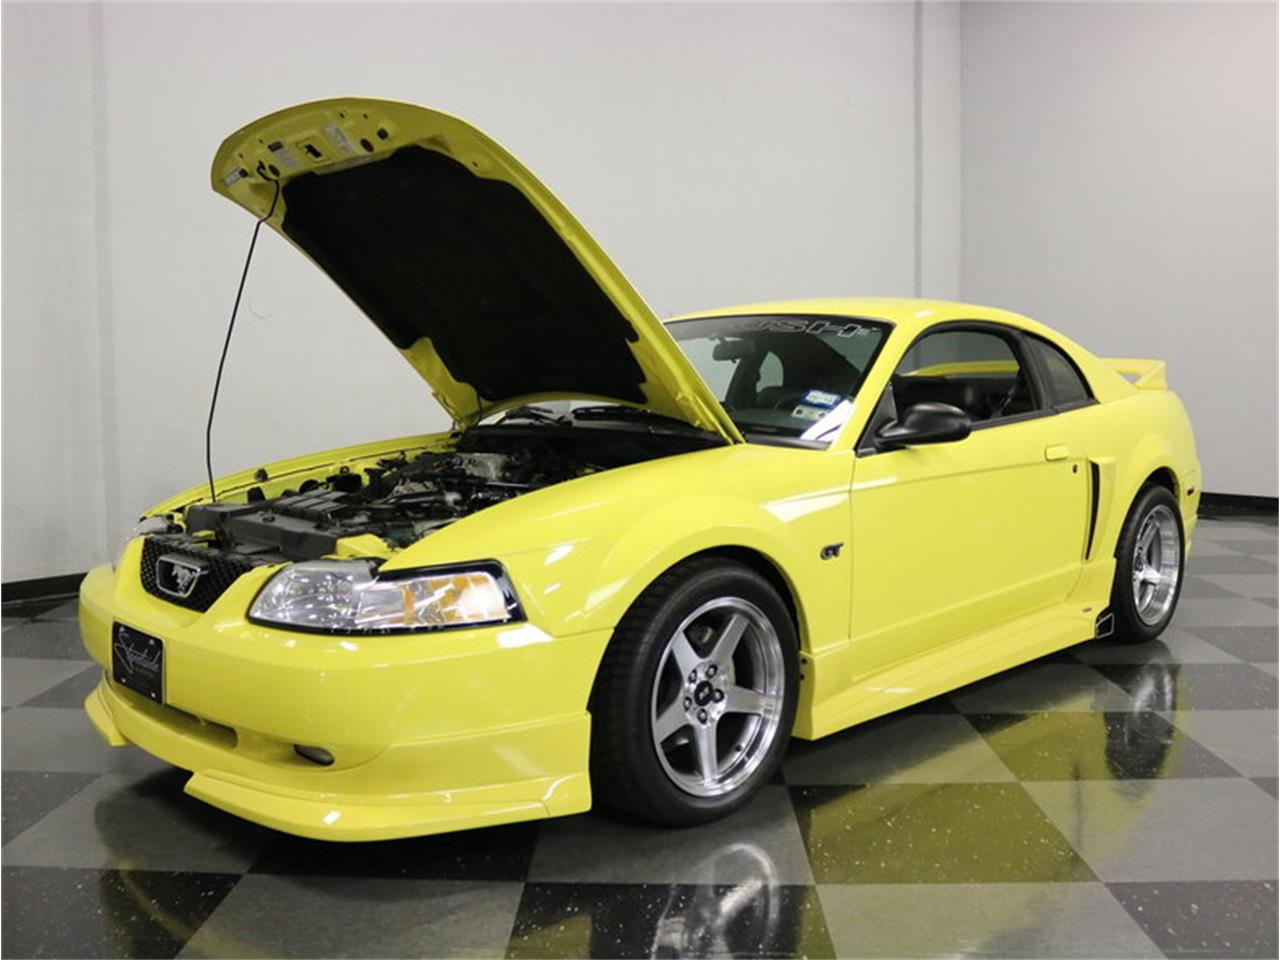 2000 Ford Mustang Roush Stage 2 for Sale | ClassicCars.com | CC-1048707